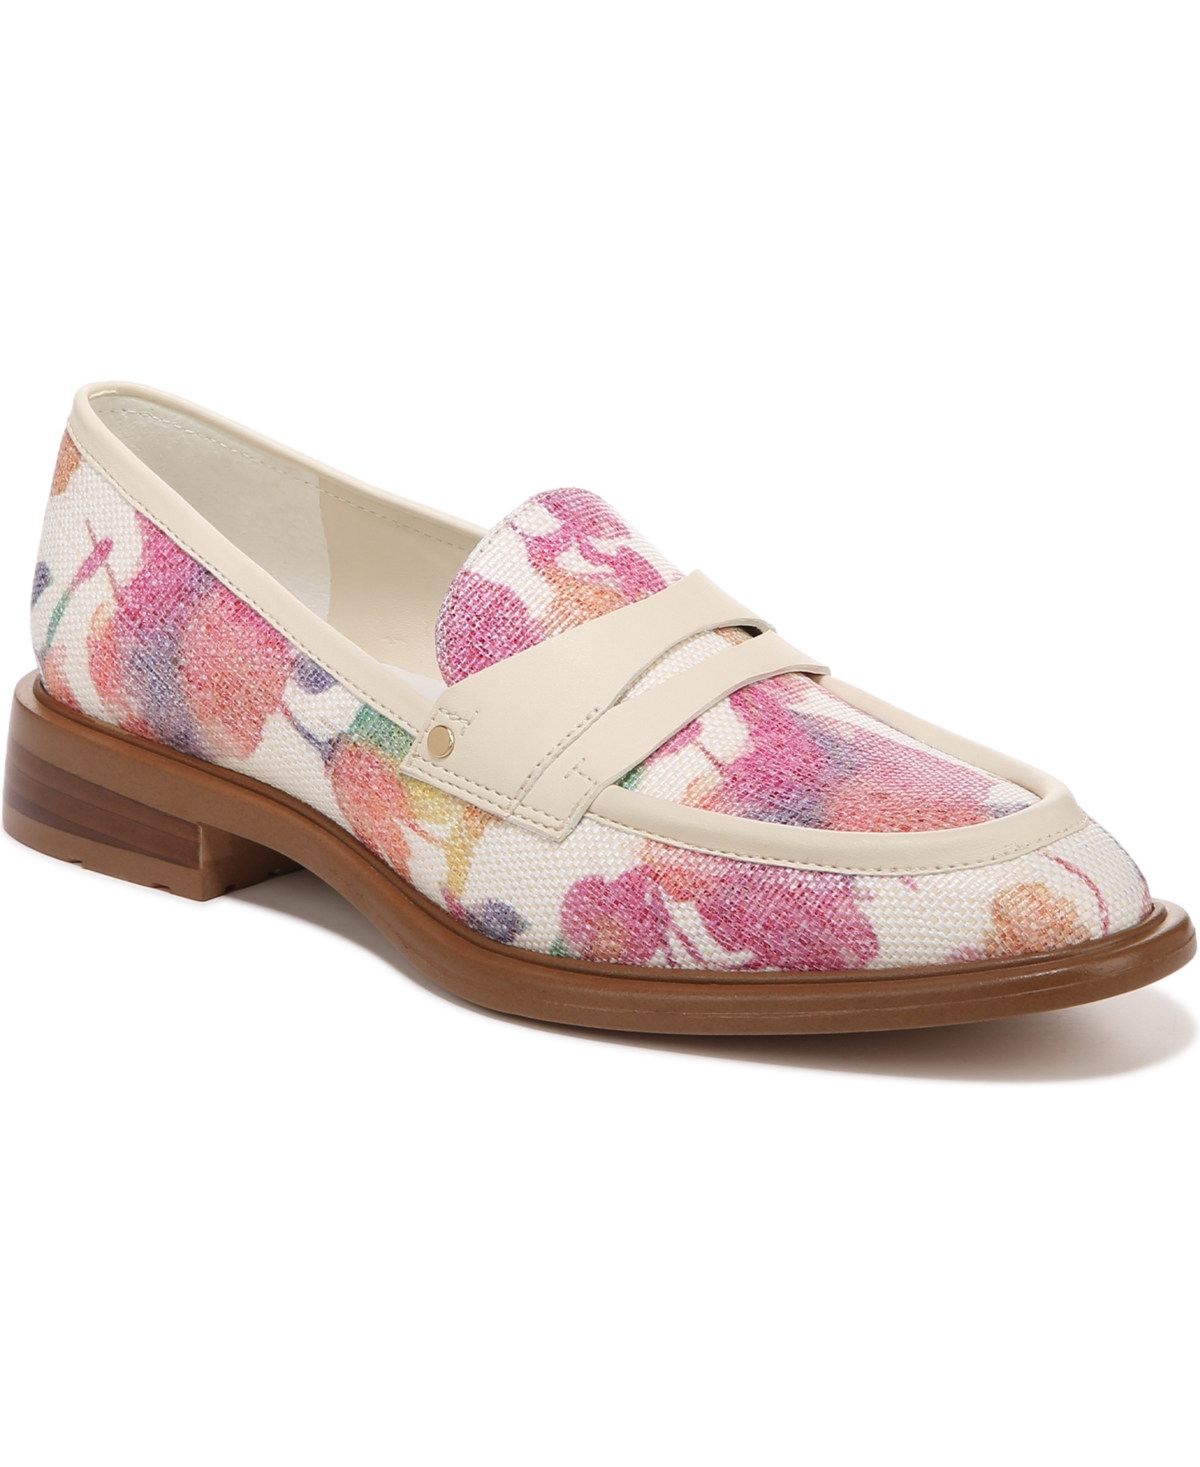 Franco Sarto Edith 2 Slip-on Loafers Women's Shoes